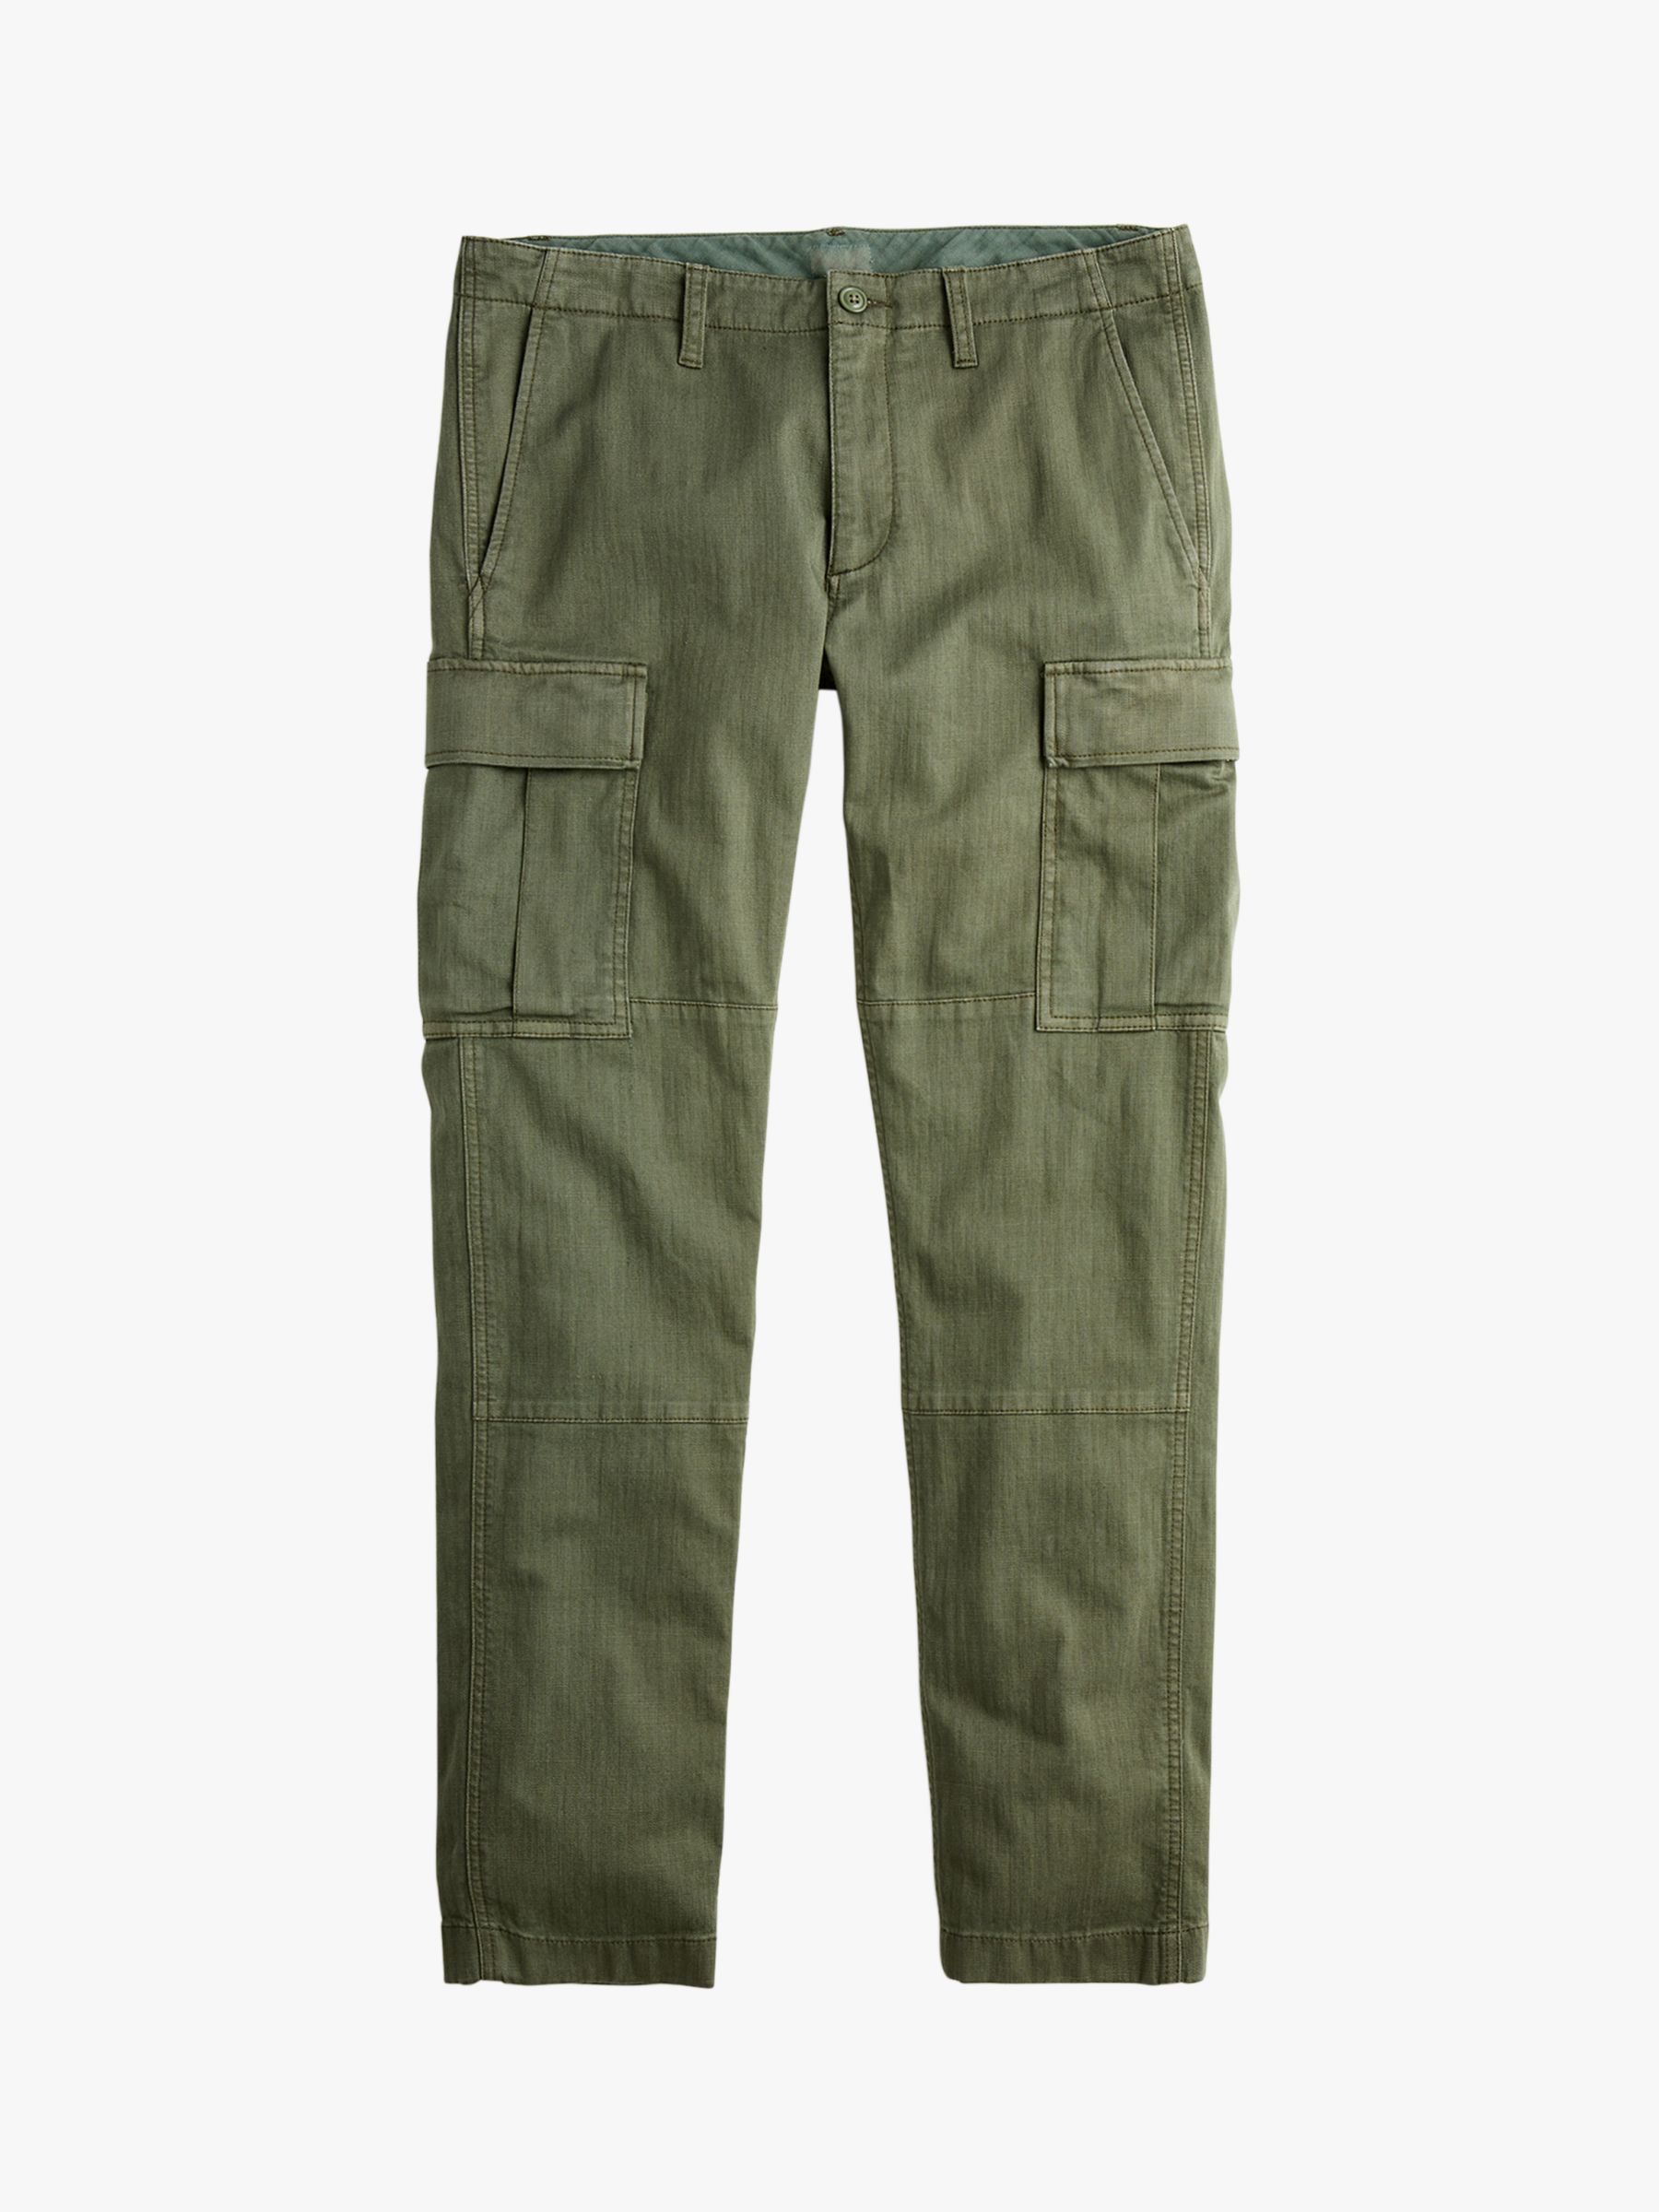 olive green slim fit cargo pants